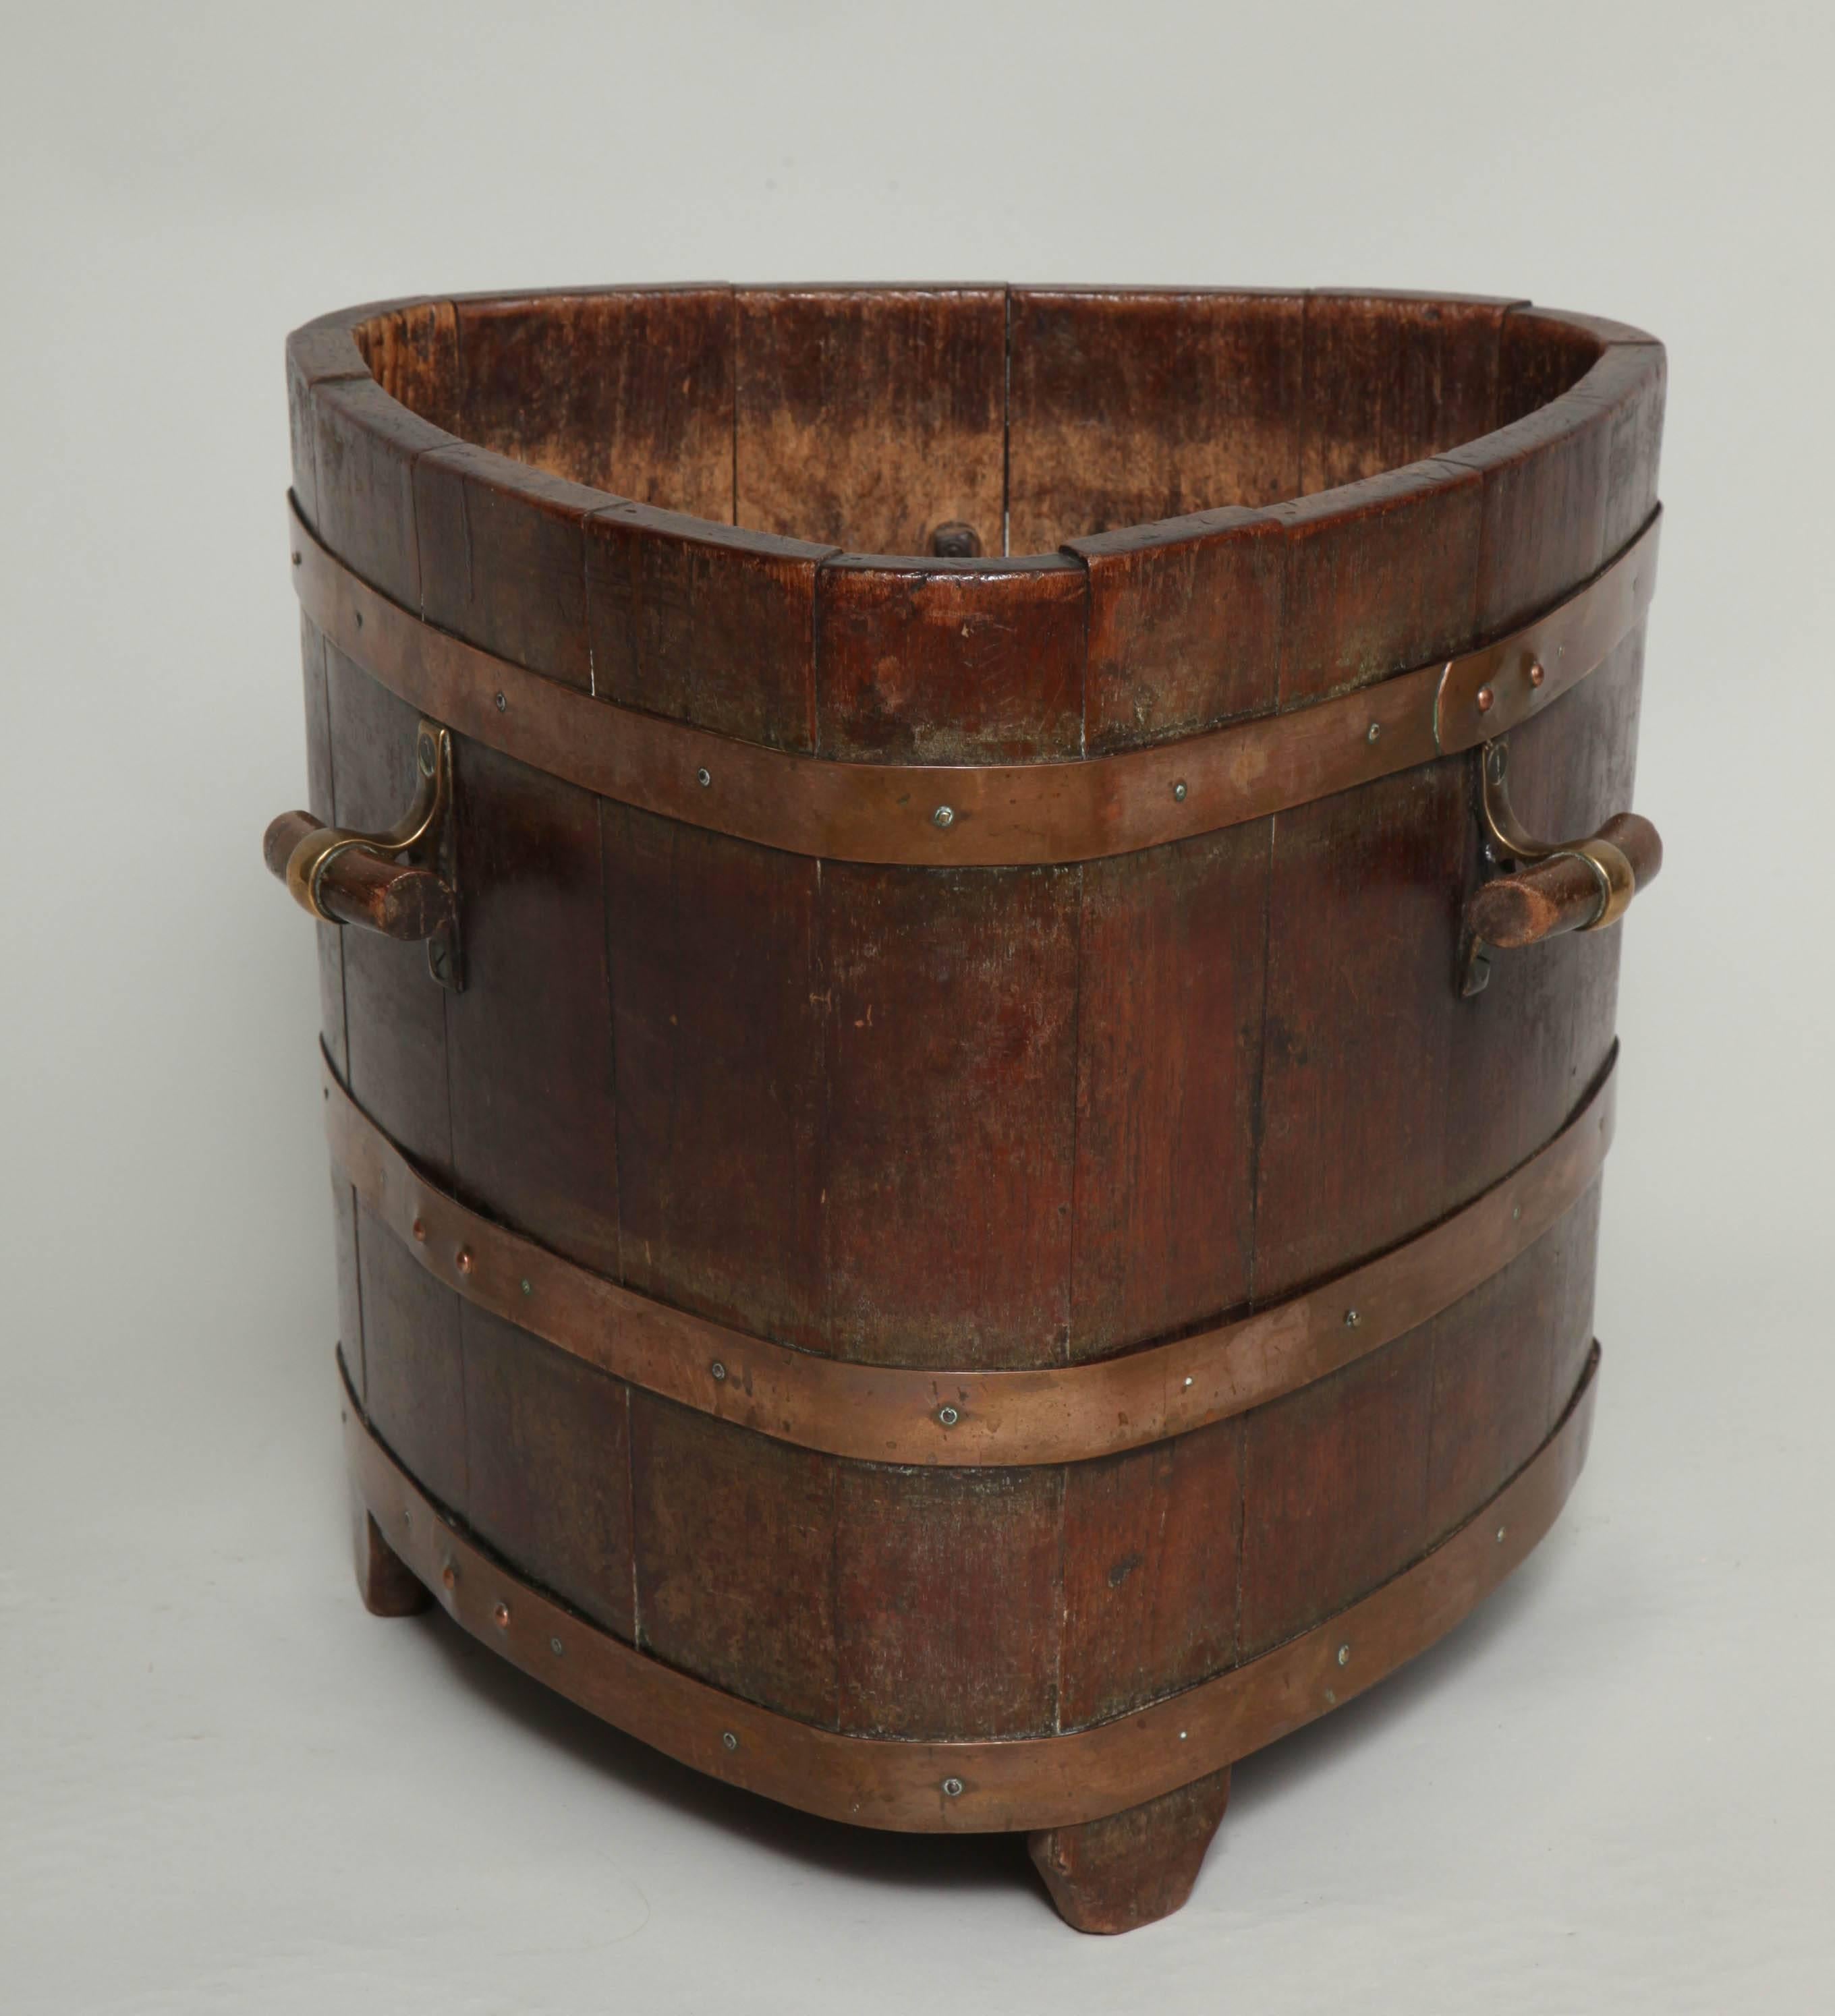 Most unusual late 19th century oak triangular barrel form log bin with three toggle handles and three bronze bands, the whole with good rich color.